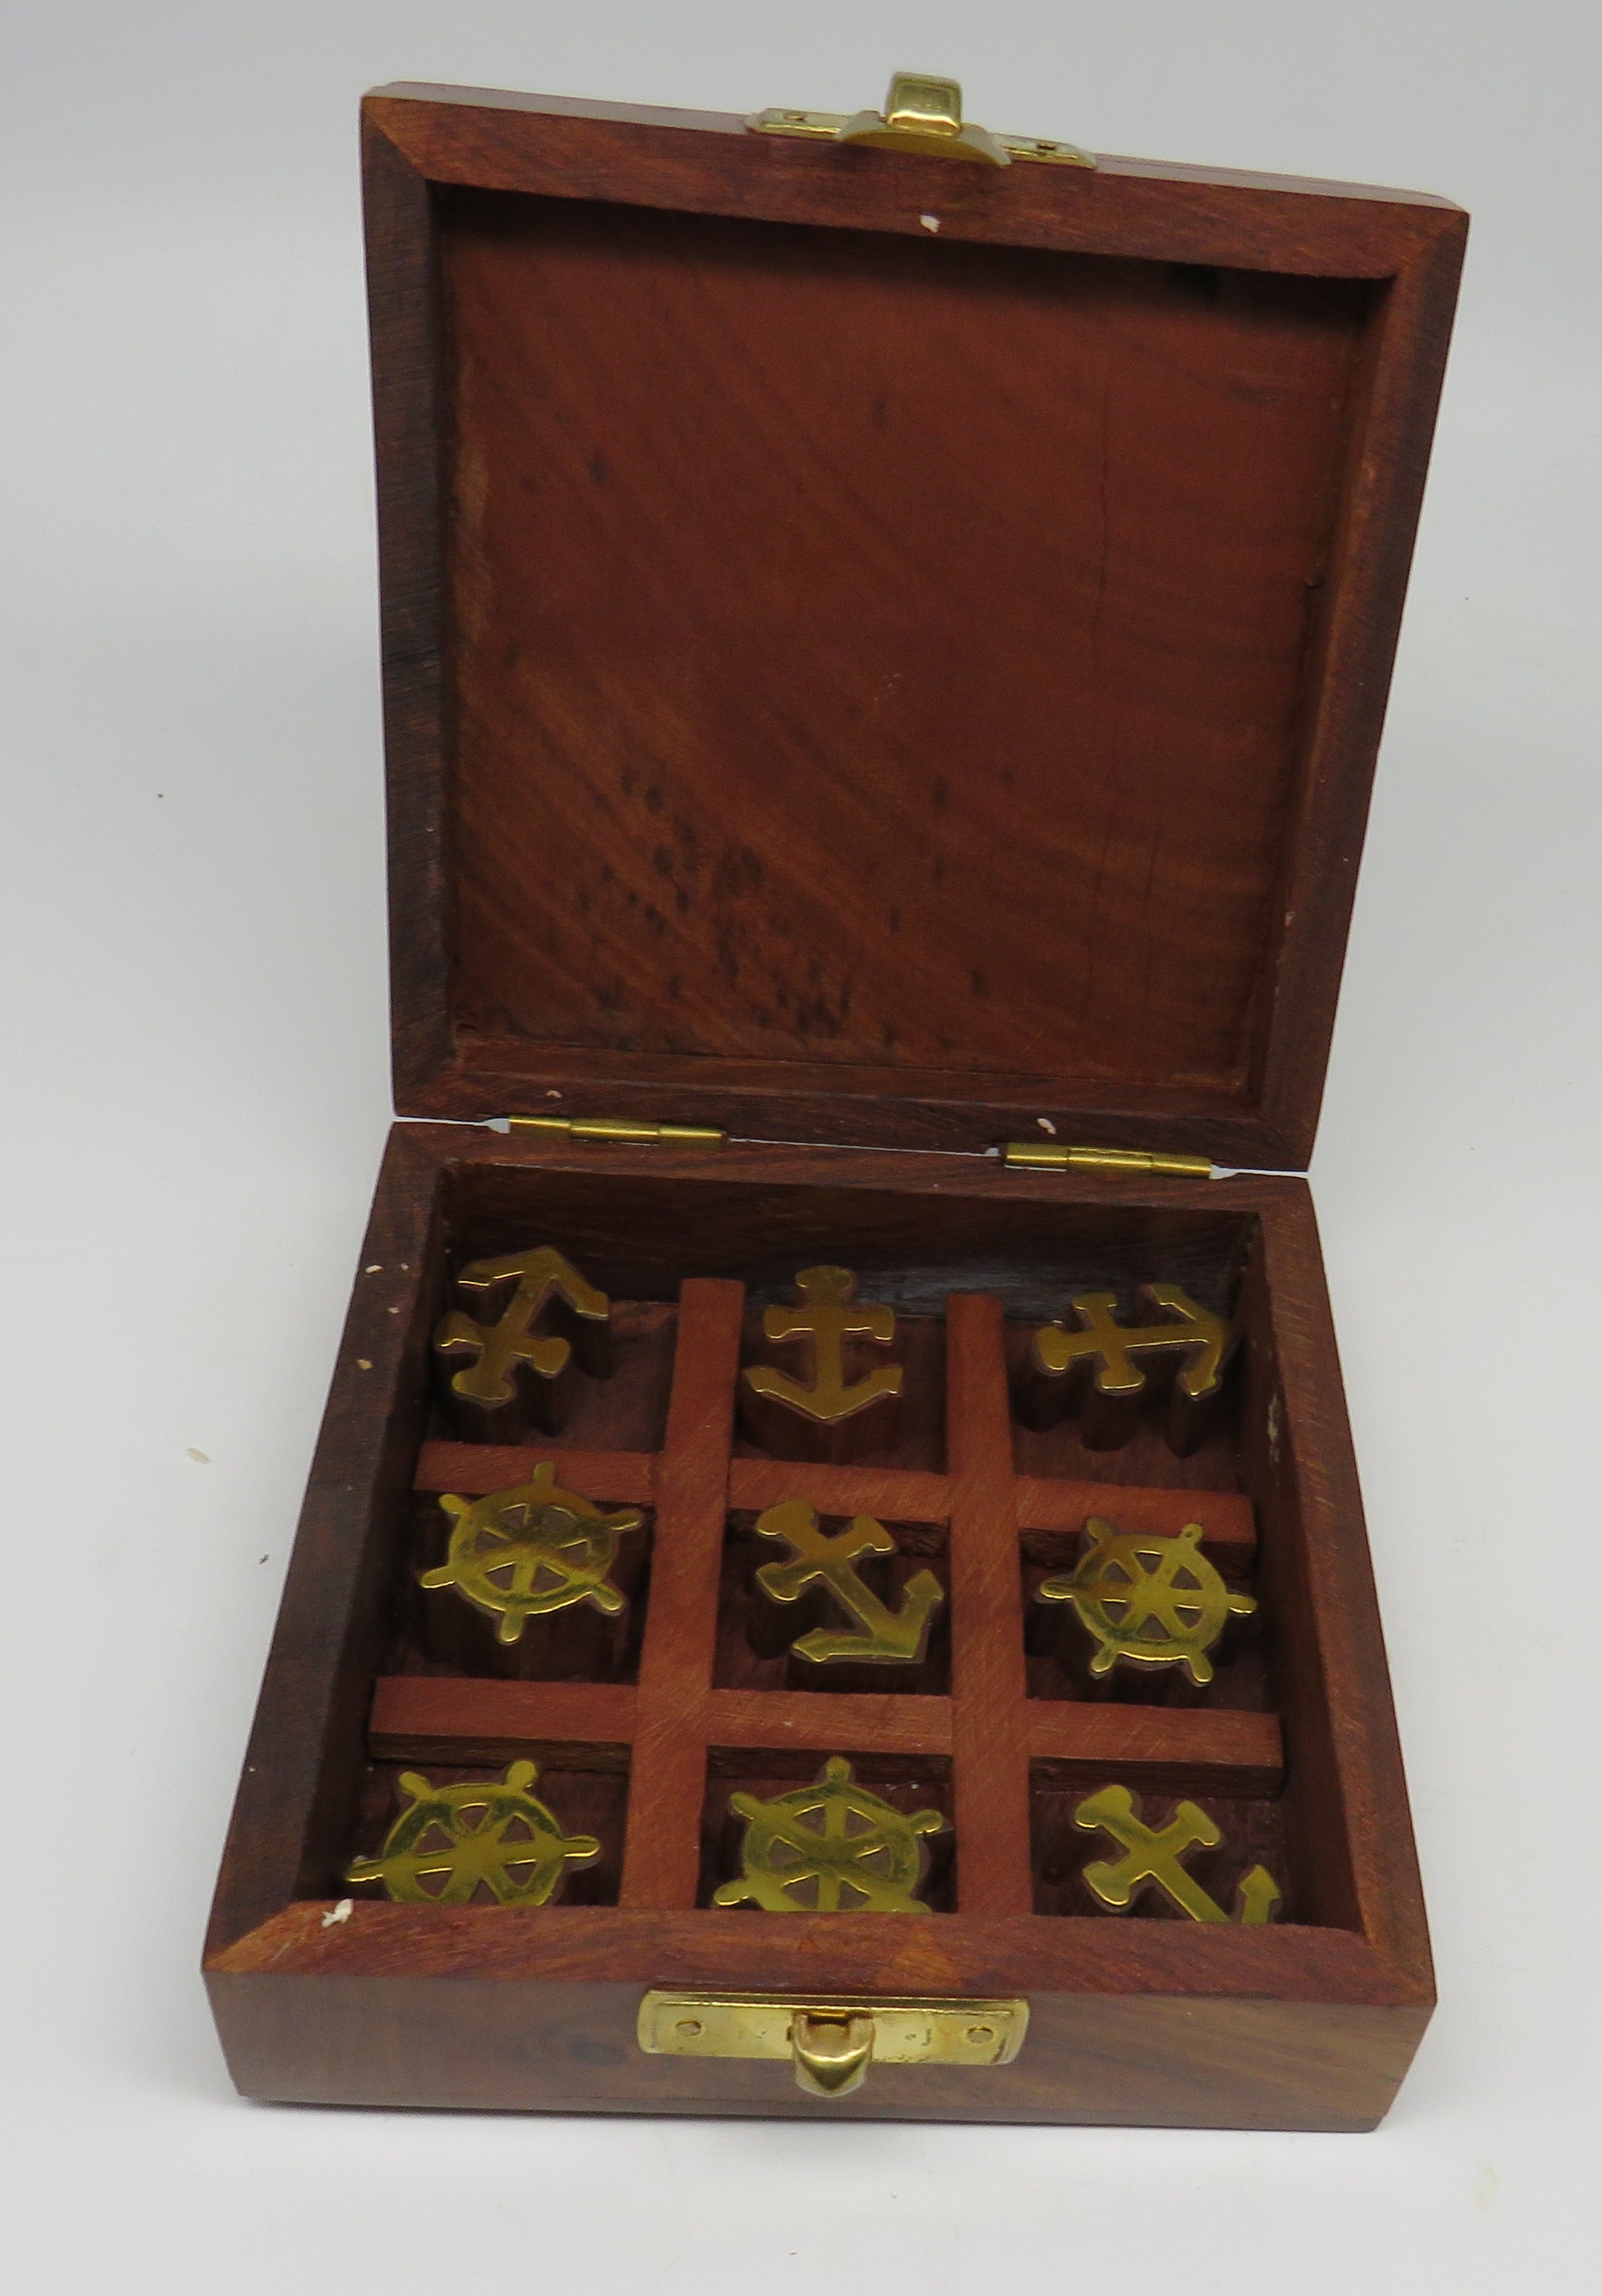 Nautical Wooden Boxed Tic-Tac-Toe Game